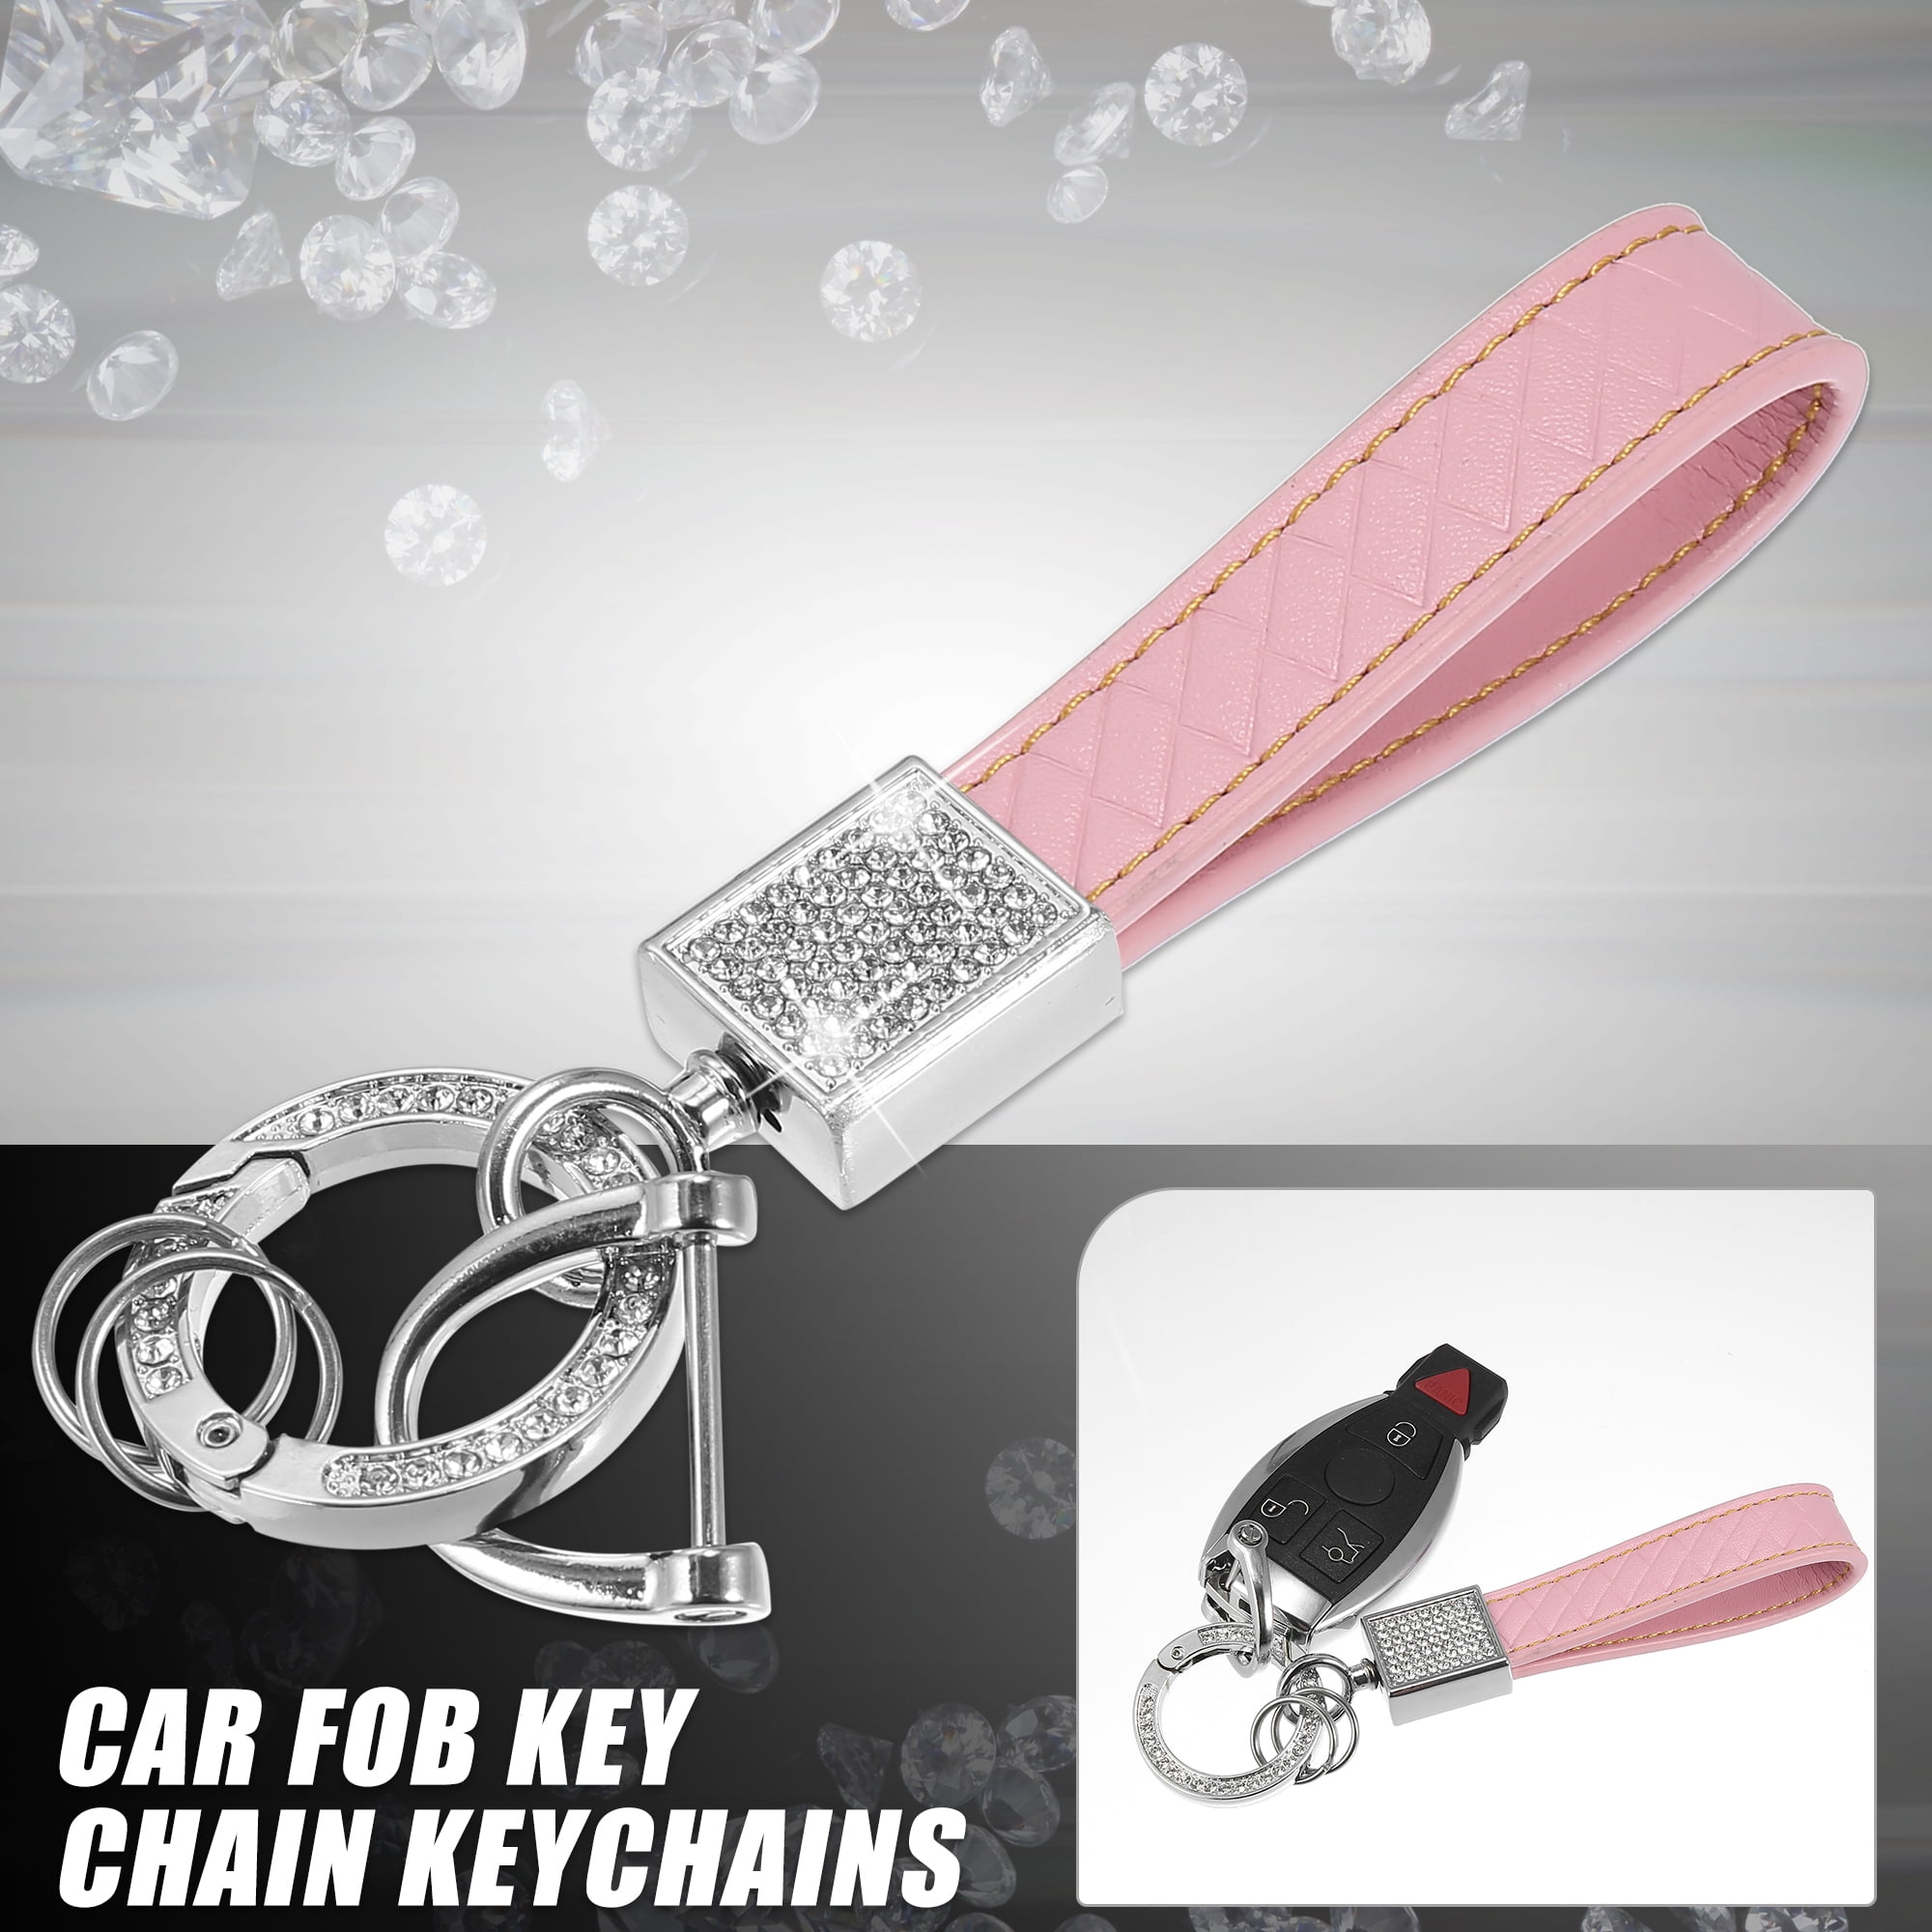 Unique Bargains Car Fob Key Chain Keychains Holder With D Shaped